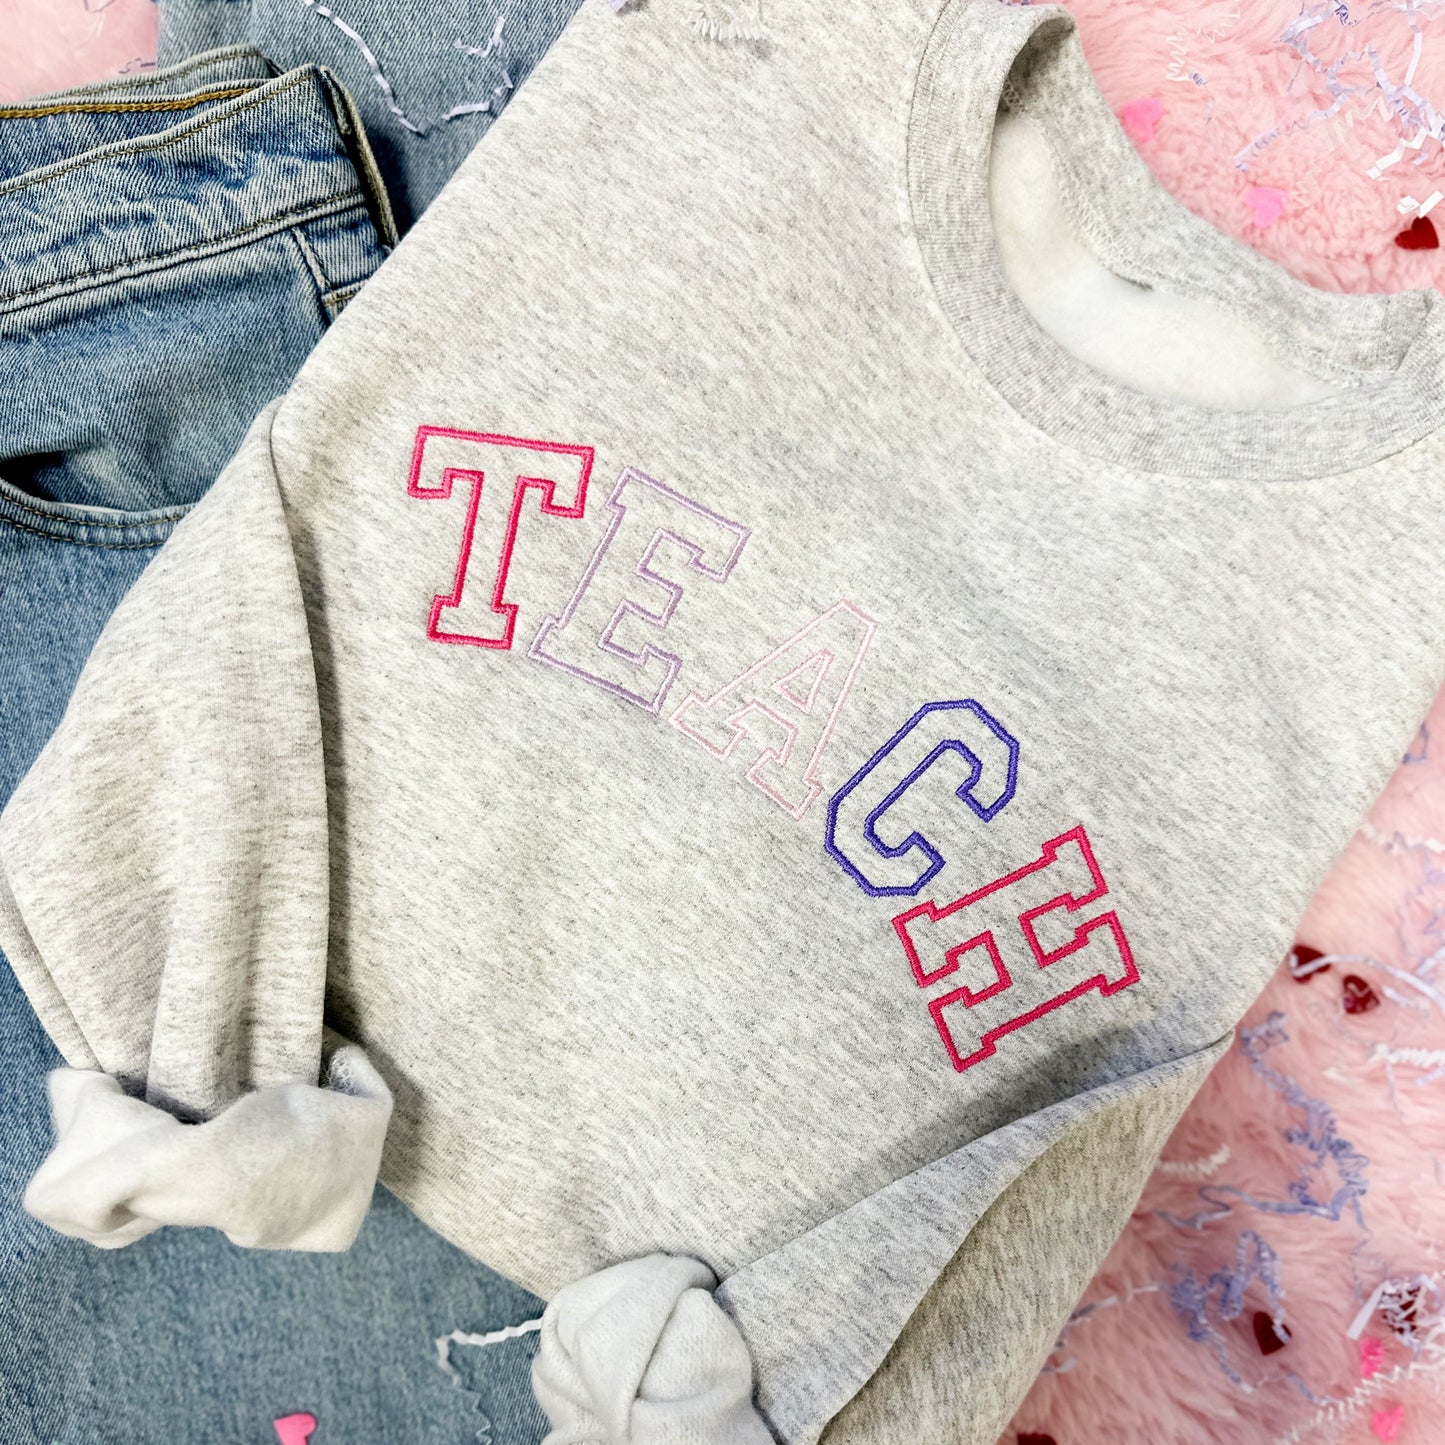 ash gray sweatshirt with TEACH embroidered in pink and purple threads in an athletic block font across the chest